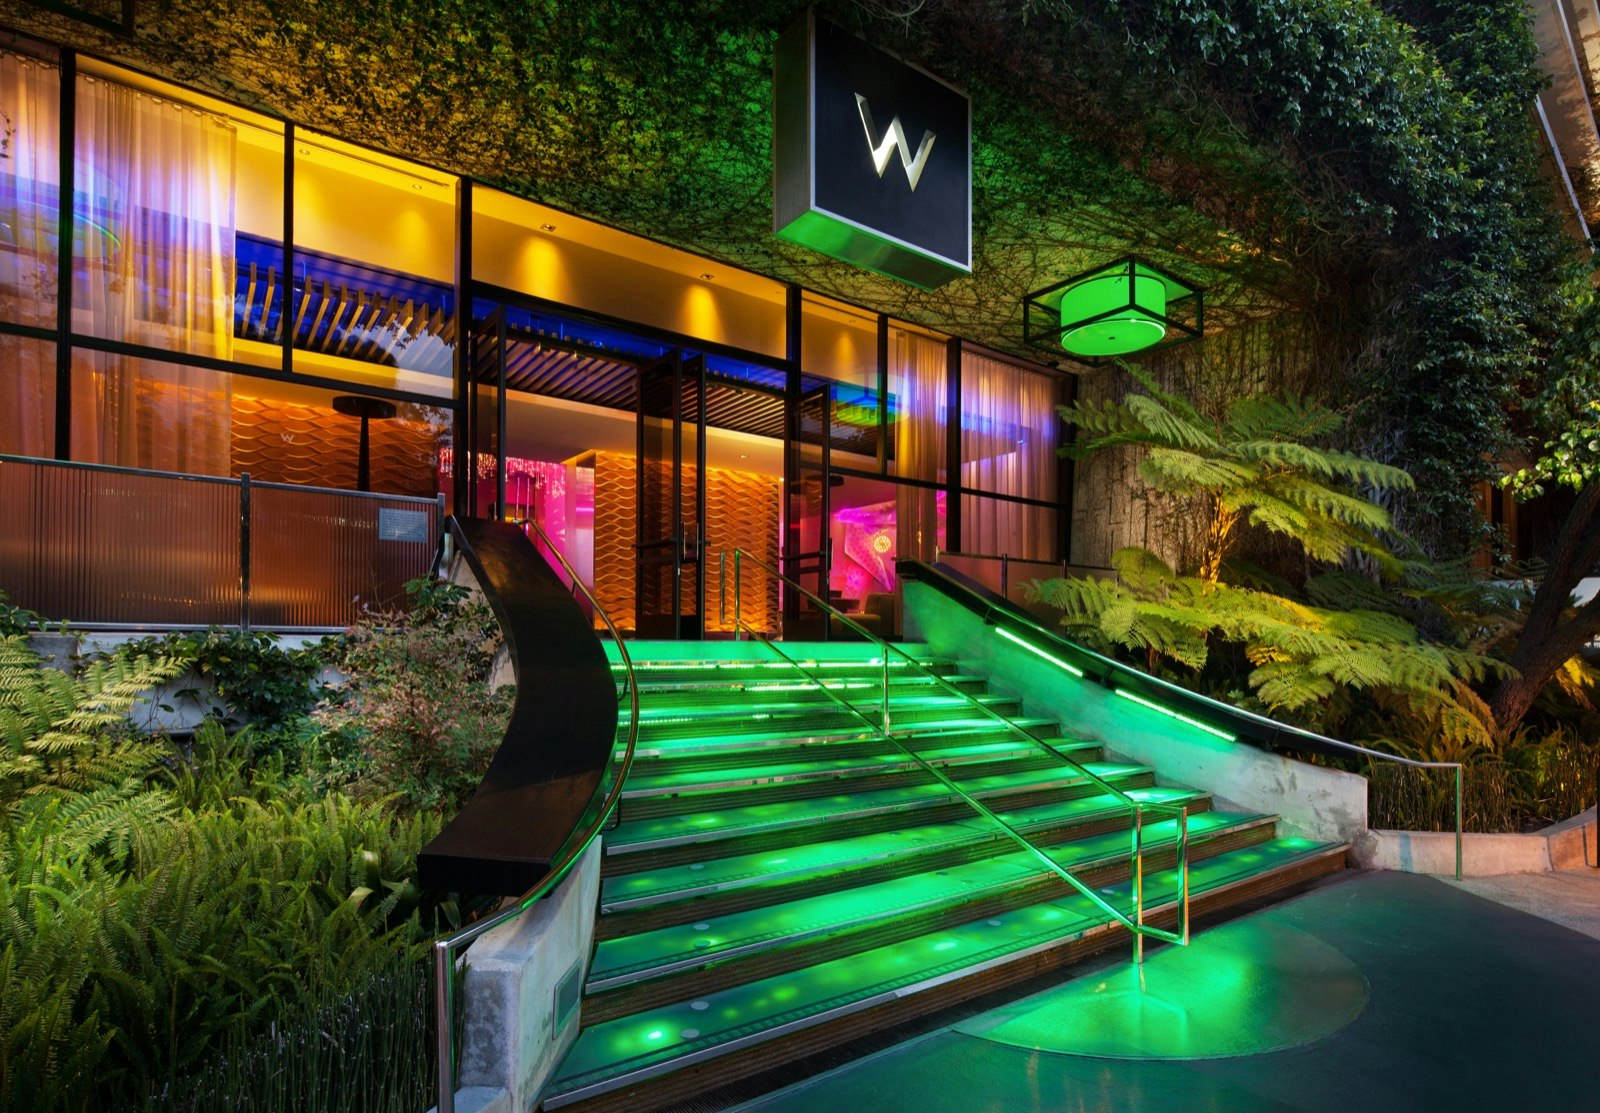 The colorful exterior of the W Hotel in Beverly Hills, California